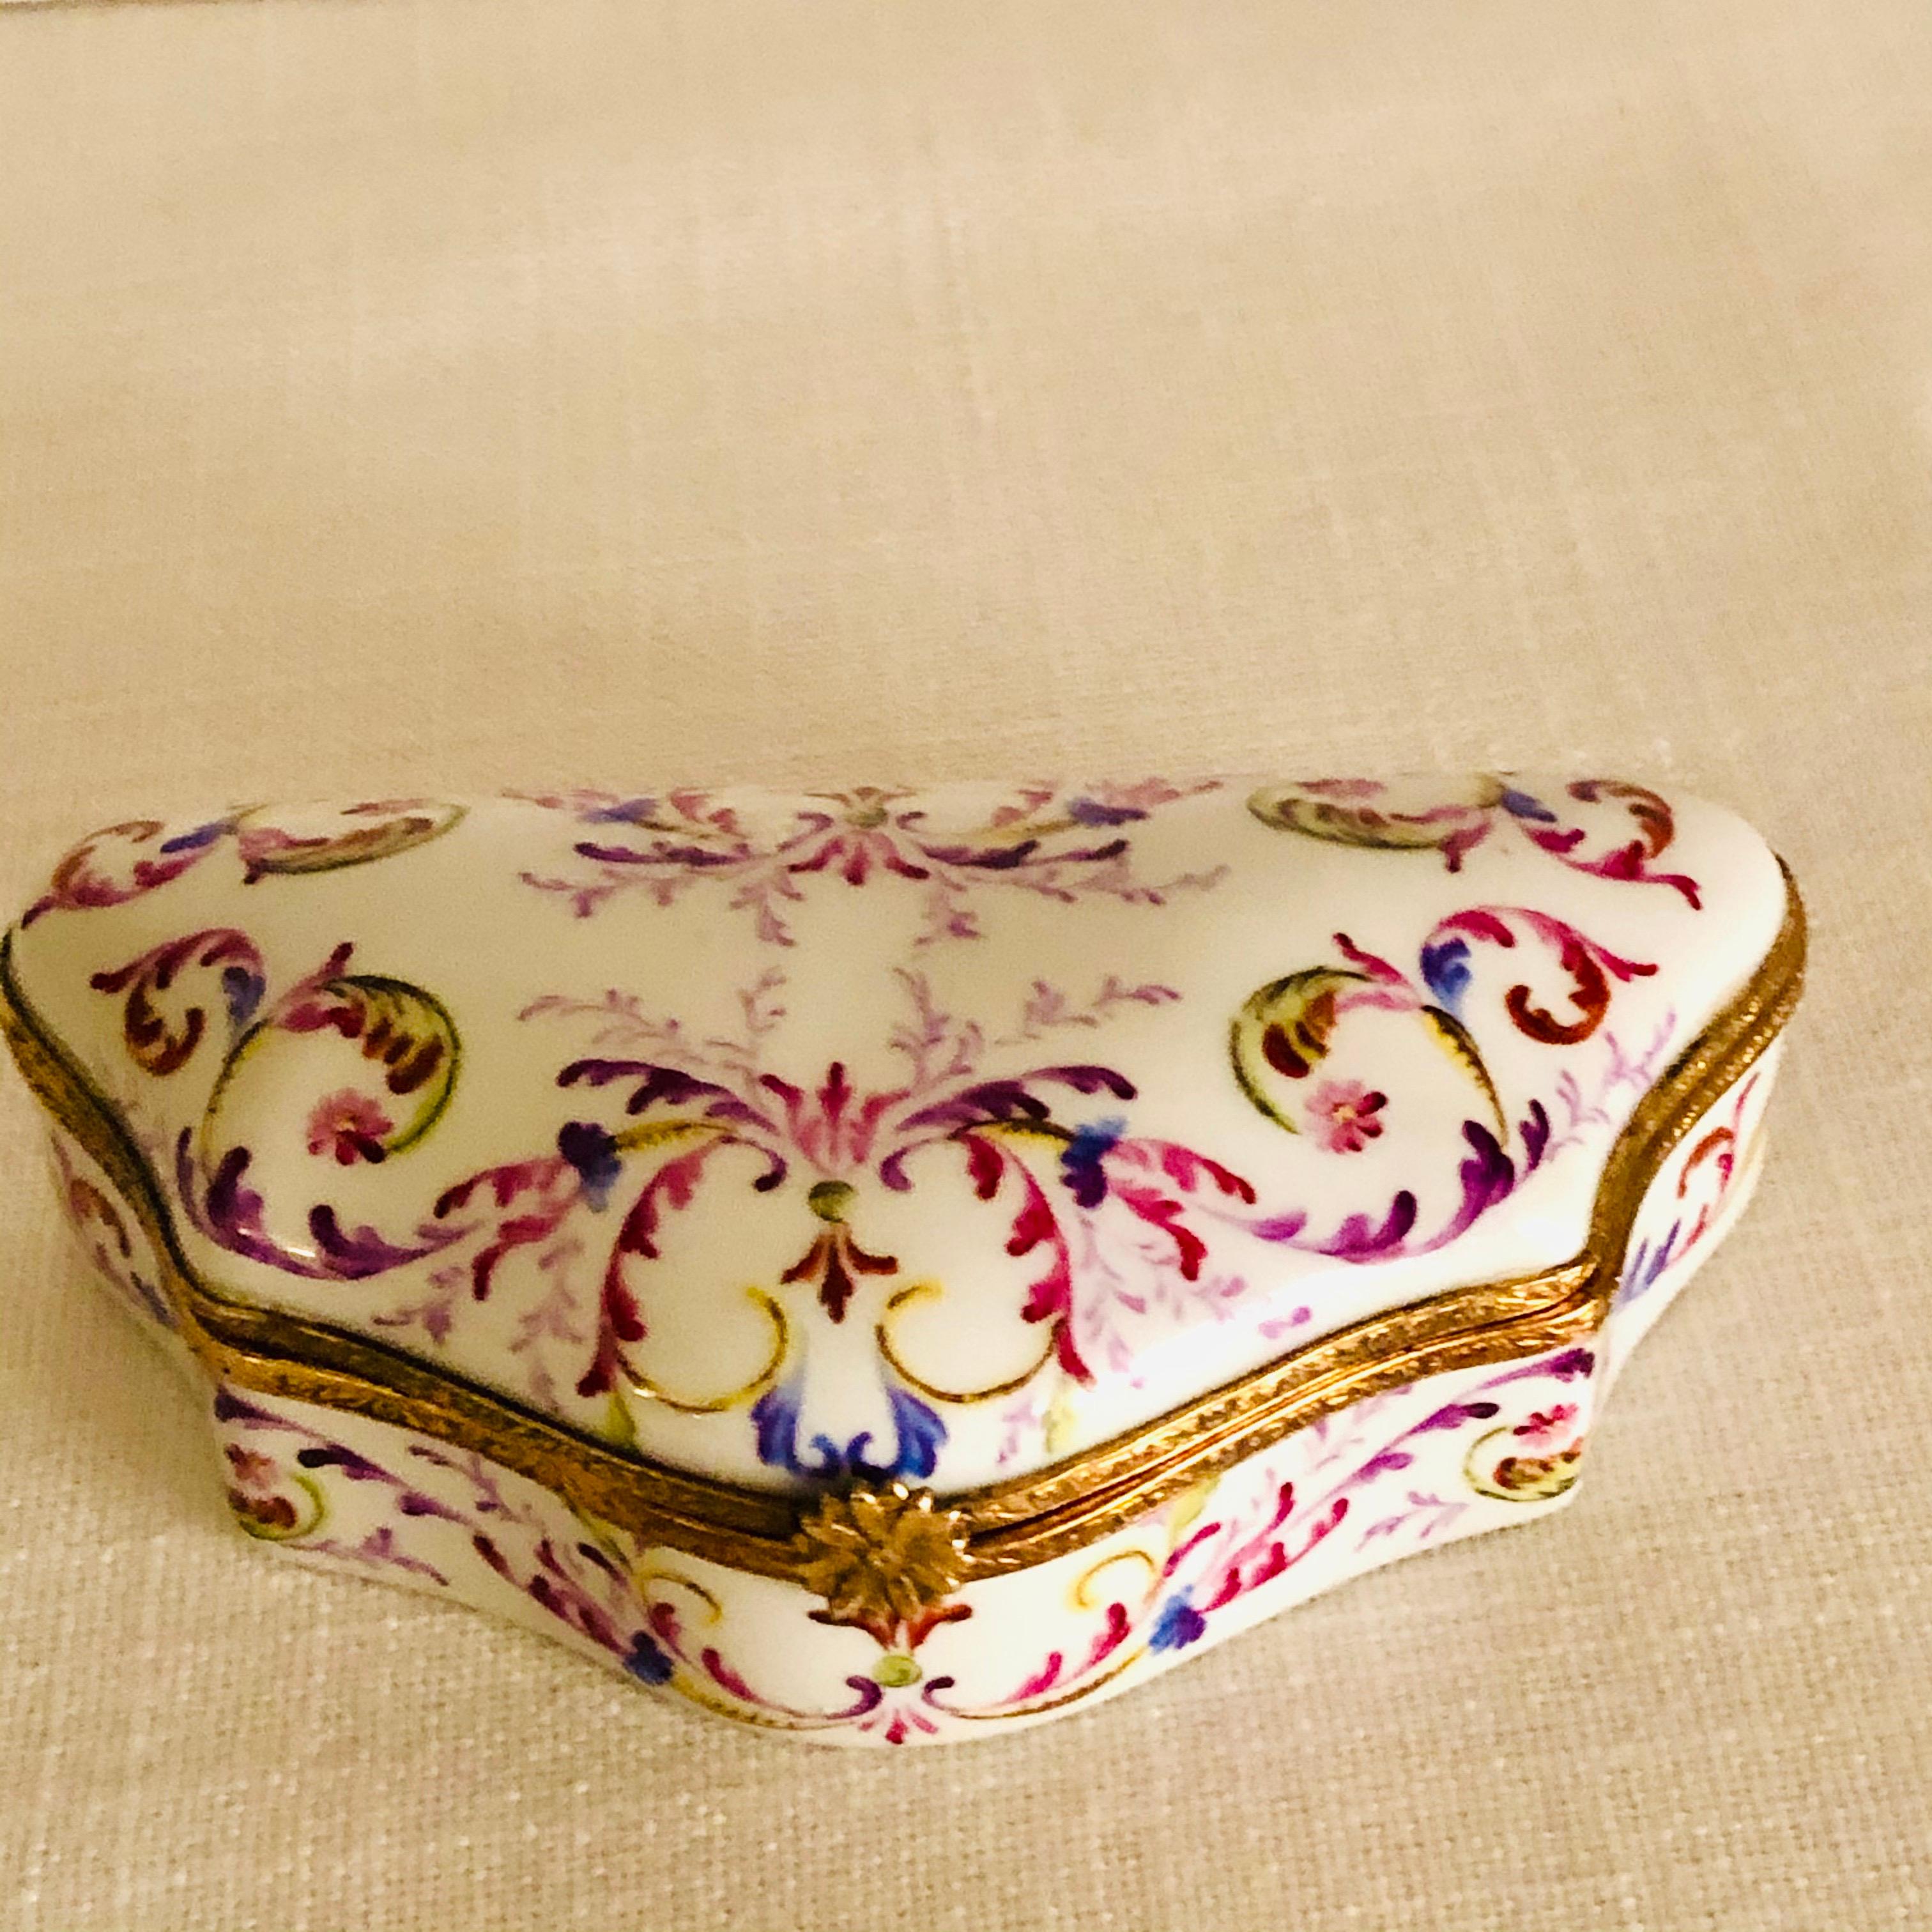 French Le Tallec Porcelain Box Painted with Elaborate Design of Many Colors and Flowers